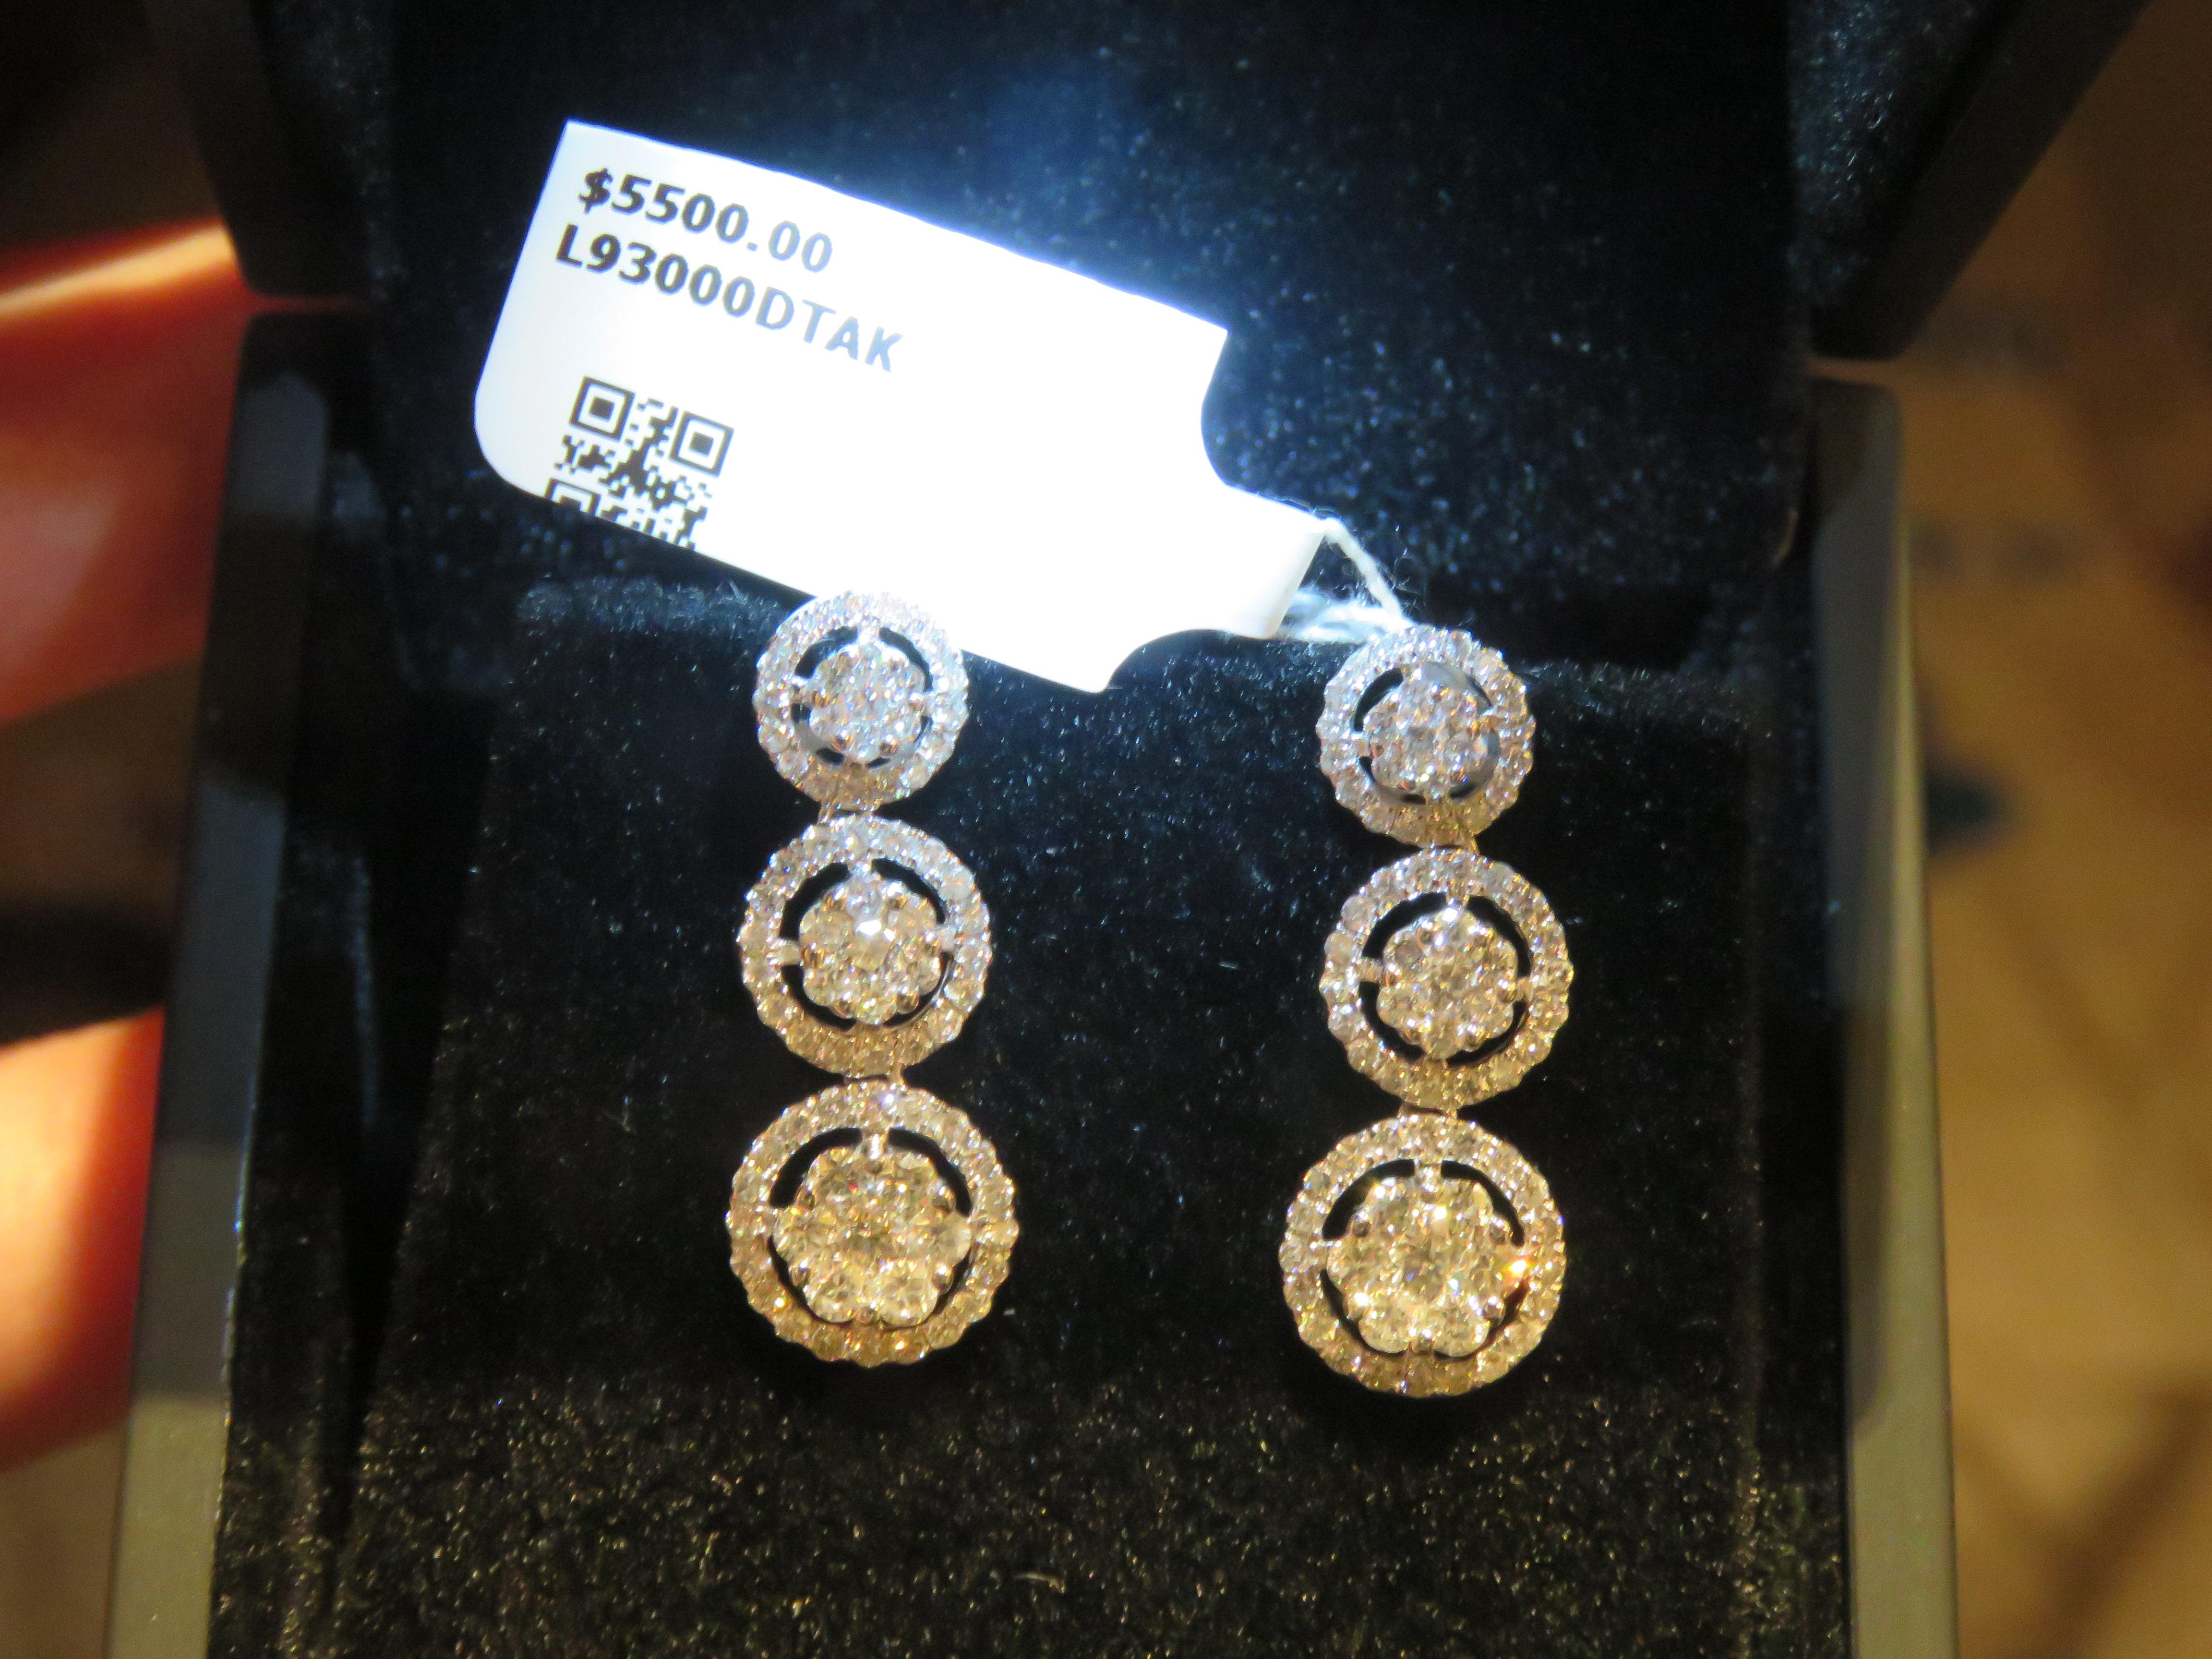 The Following Items we are offering is a Rare Important Radiant Pair of 18KT Gold Gorgeous Large Glittering Diamond Dangle Earrings. Stones are Very Clean and Extremely Fine! T.C.W. for Earrings Approx 1.50 CTS!!! From a Private Manufacturer that